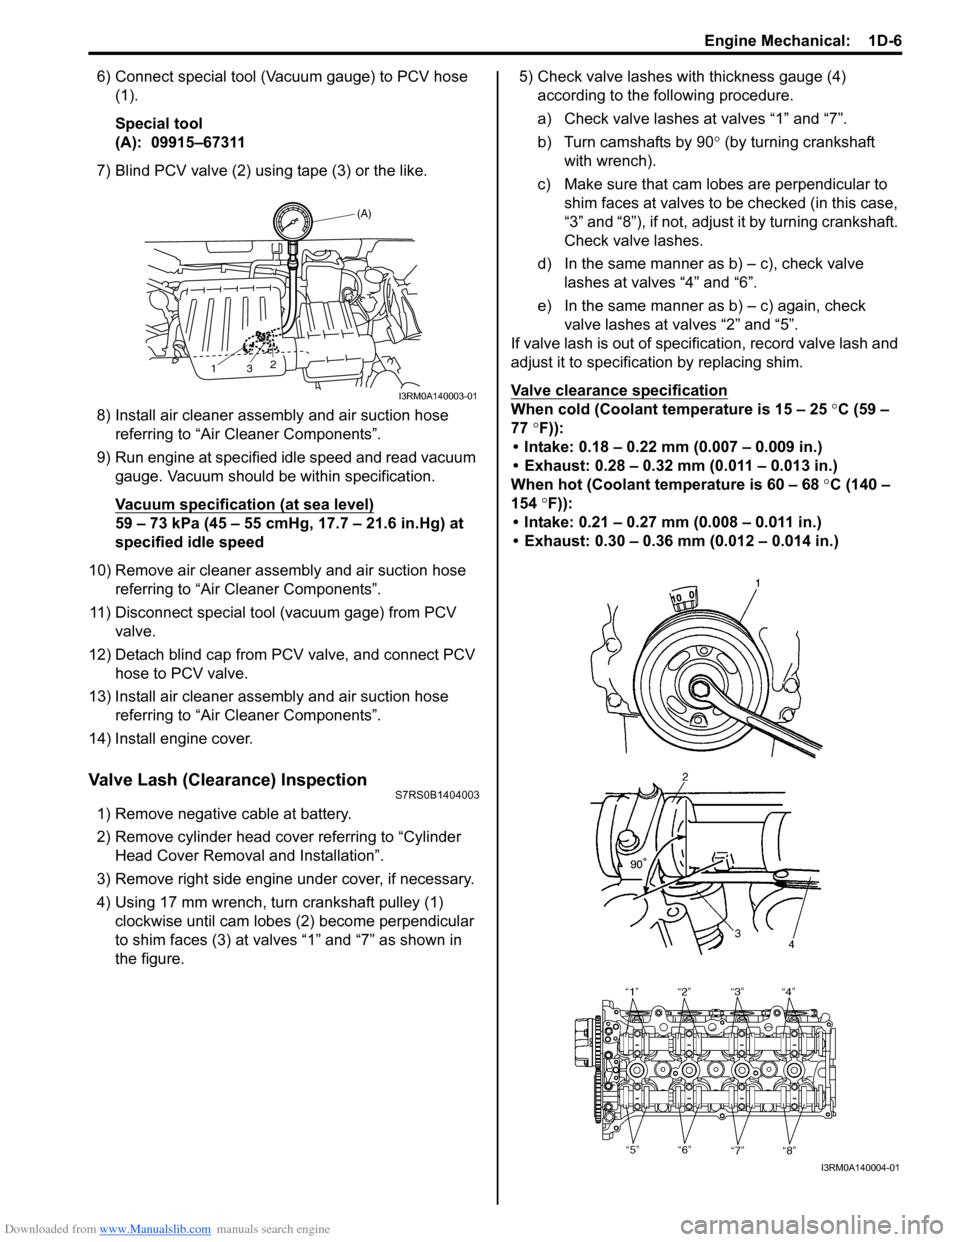 SUZUKI SWIFT 2006 2.G Service Workshop Manual Downloaded from www.Manualslib.com manuals search engine Engine Mechanical:  1D-6
6) Connect special tool (Vacuum gauge) to PCV hose (1).
Special tool
(A):  09915–67311
7) Blind PCV valve (2) using 